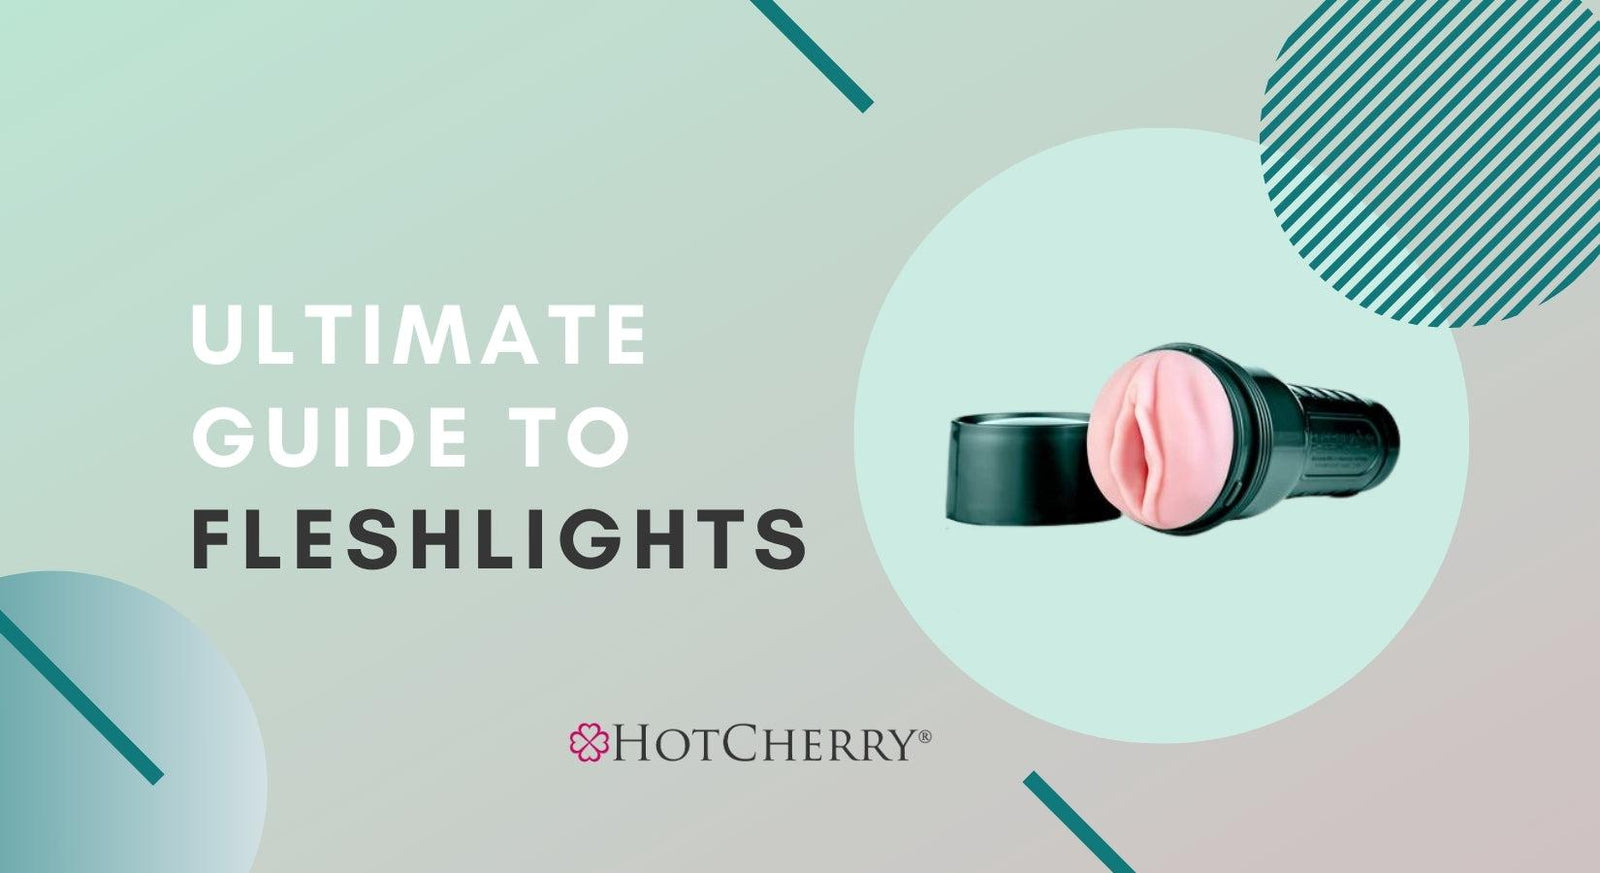 Ultimate Guide to Fleshlights